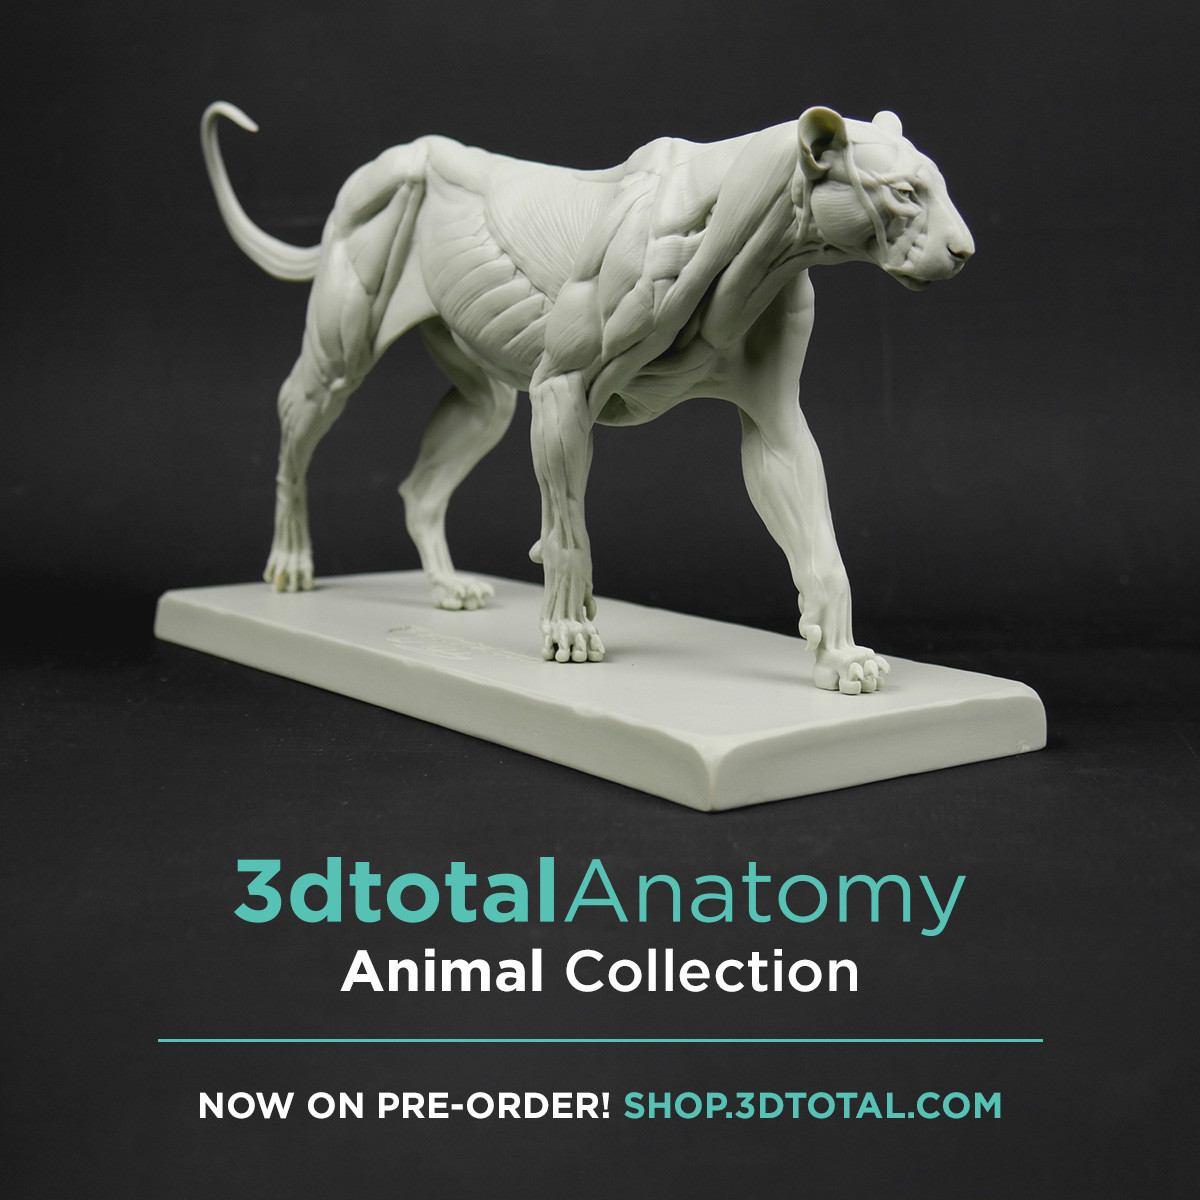 If you want to order the Feline ecorche :
https://shop.3dtotal.com/3dtotal-anatomy-feline-figure.html